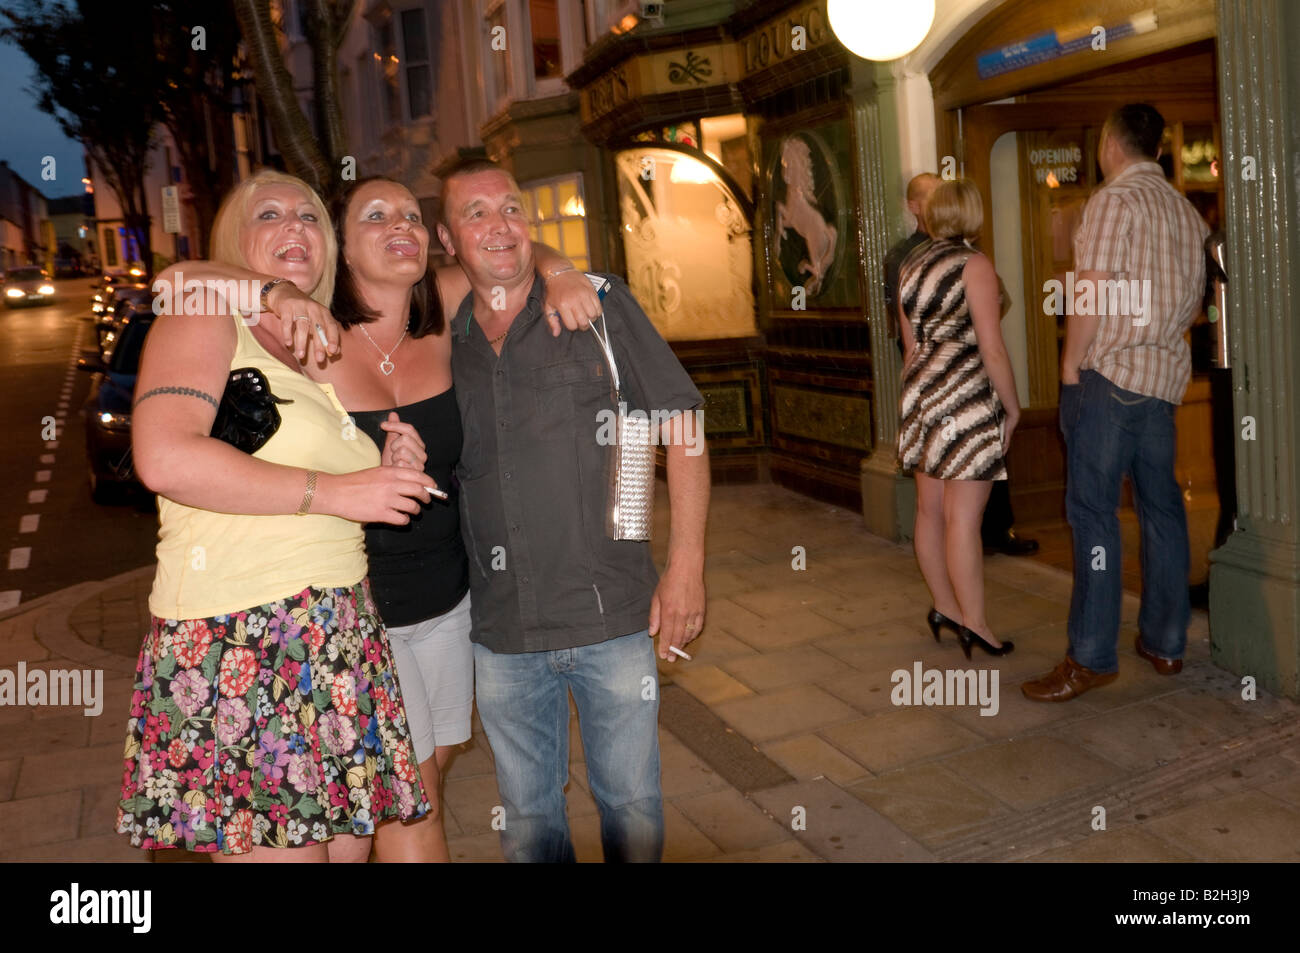 Three people man and two women outside pub smoking and posing for photograph in Aberystwyth Wales UK Stock Photo